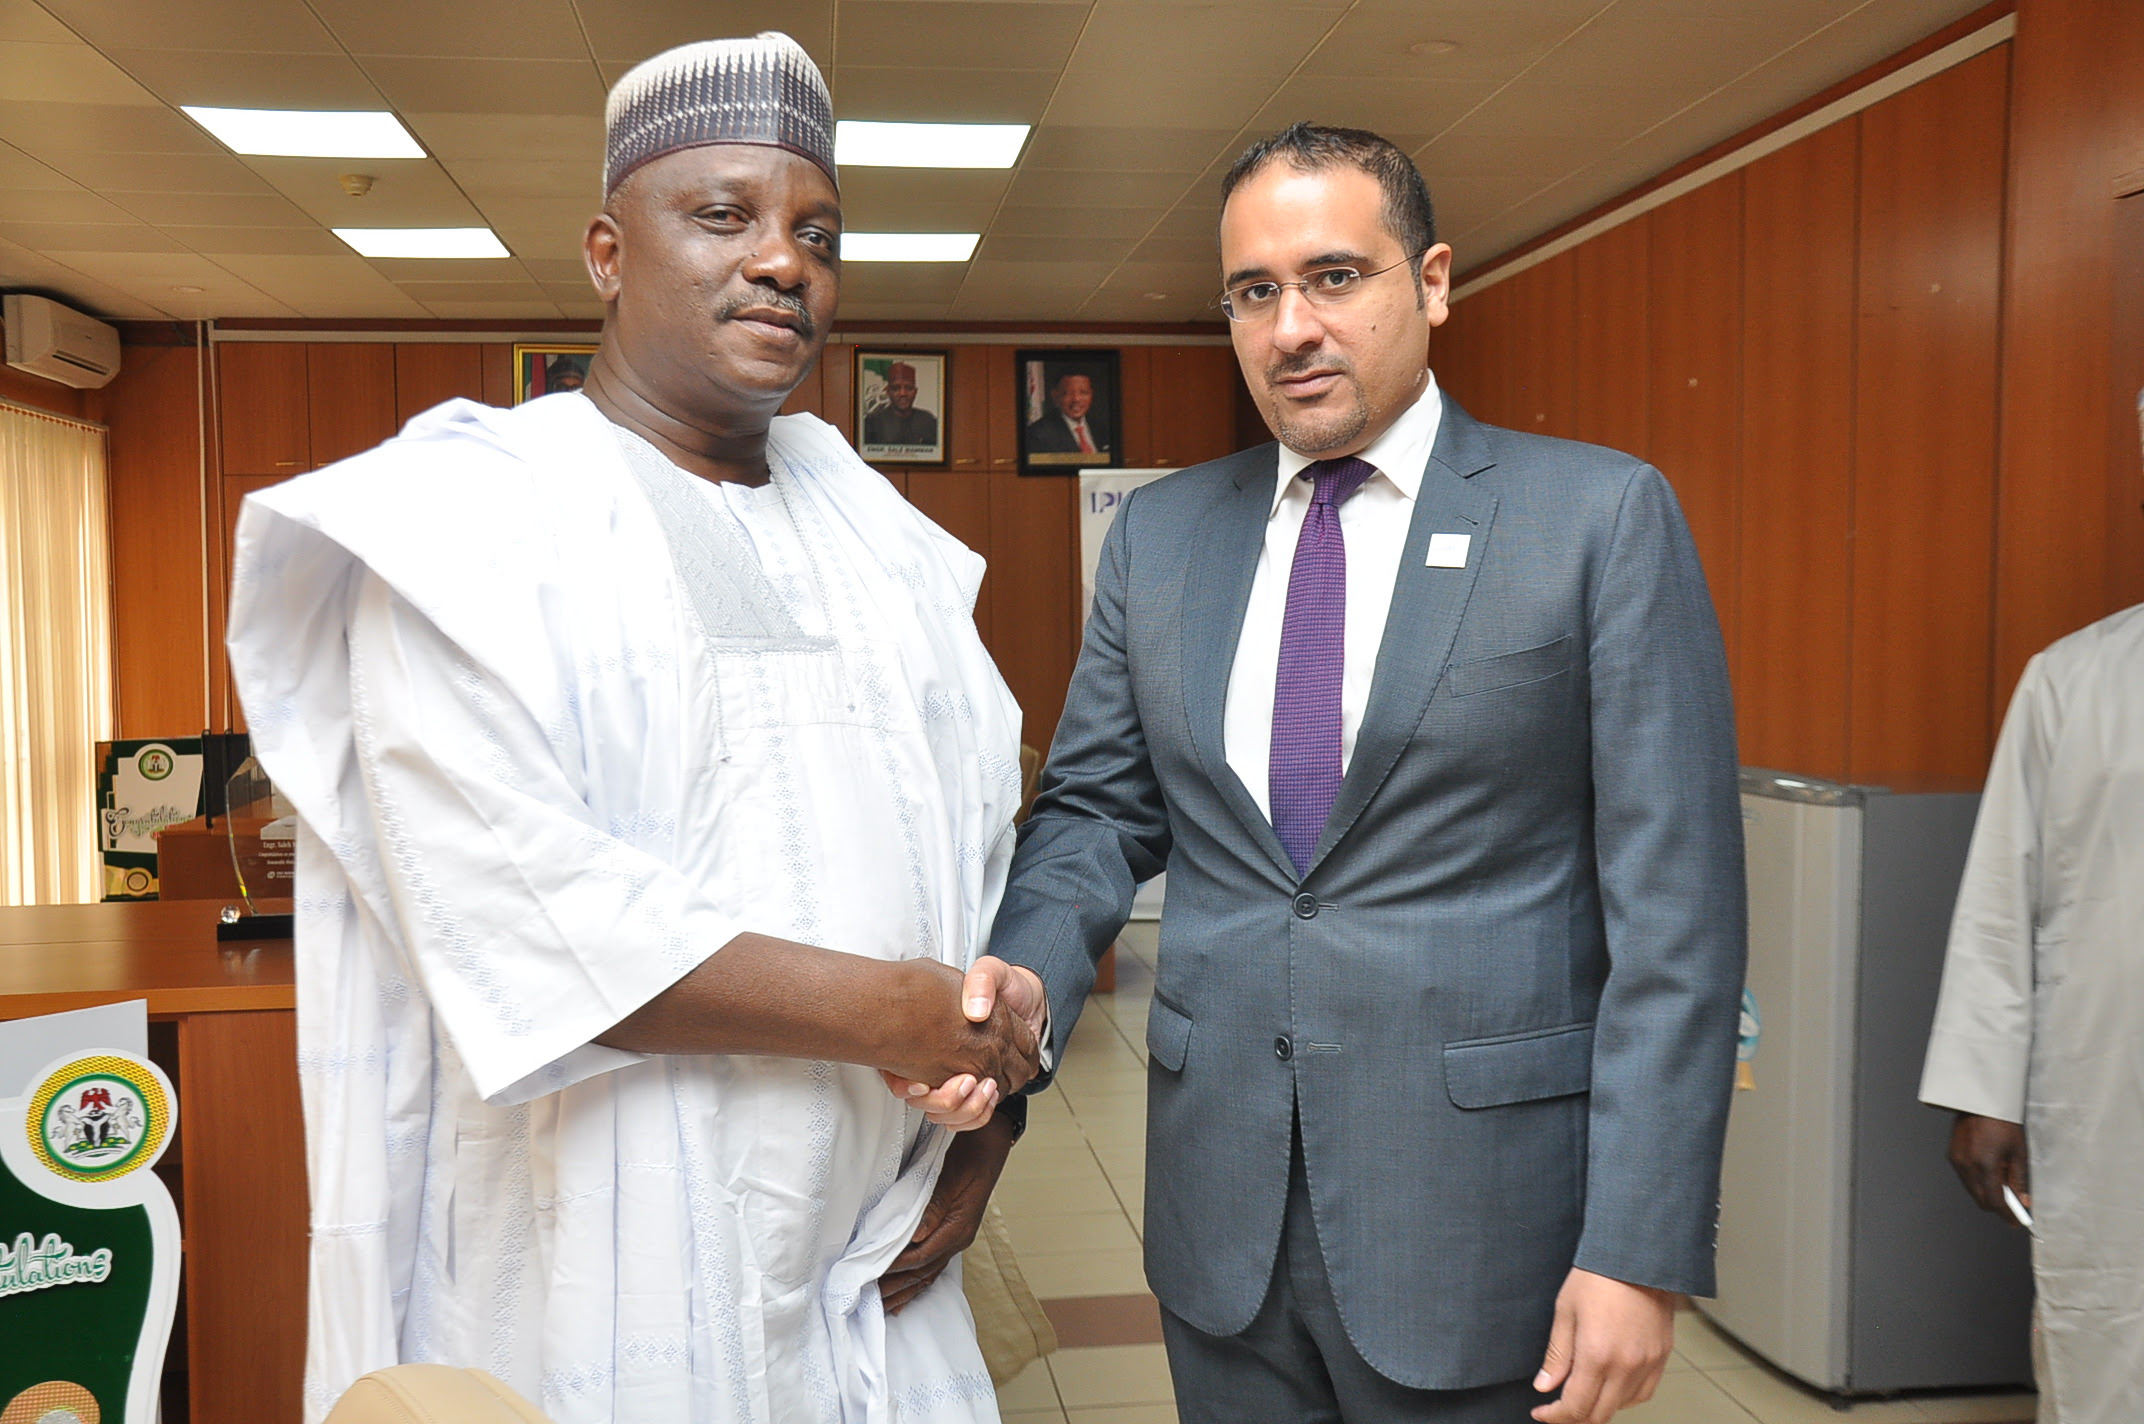 The Honorable Minister of Power,  Engr. Sale Mamman (left) and the United Arab Emirate Ambassador to Nigeria, Dr. Fahad Obaid Al Taffaq, during the courtesy visit in Abuja on Tuesday, 8th October, 2019.